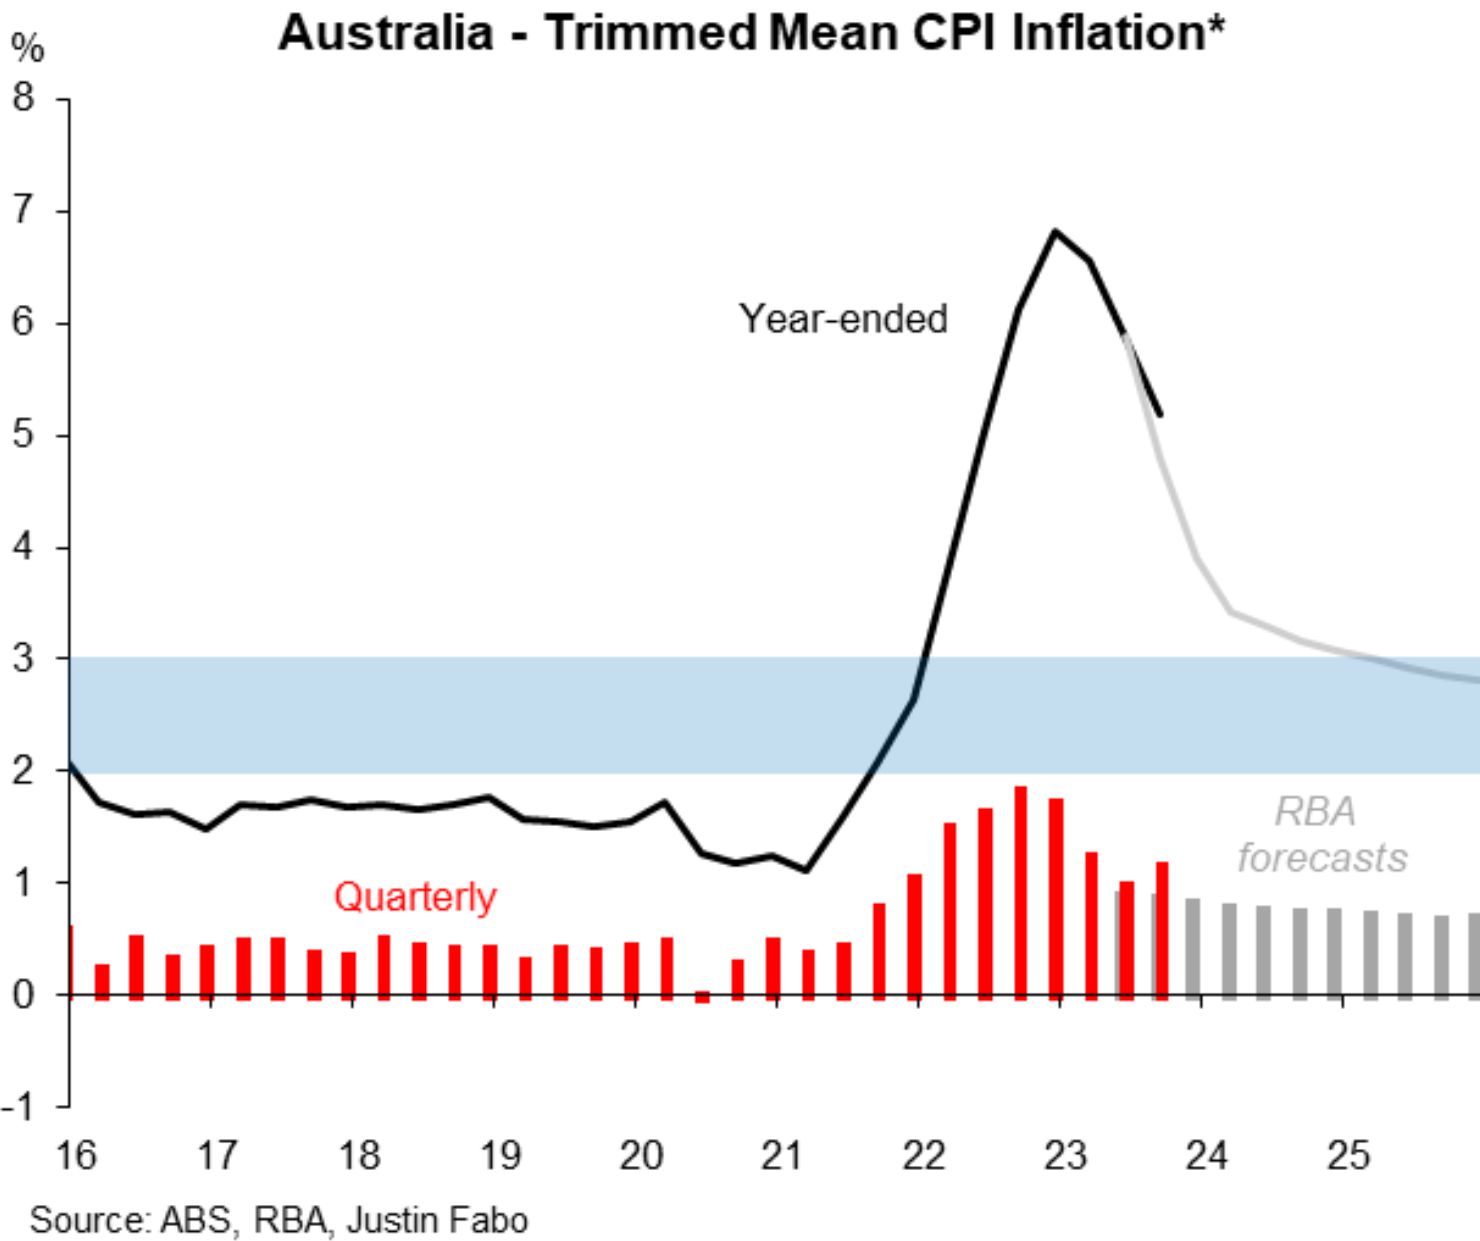 Trimmed Mean inflation